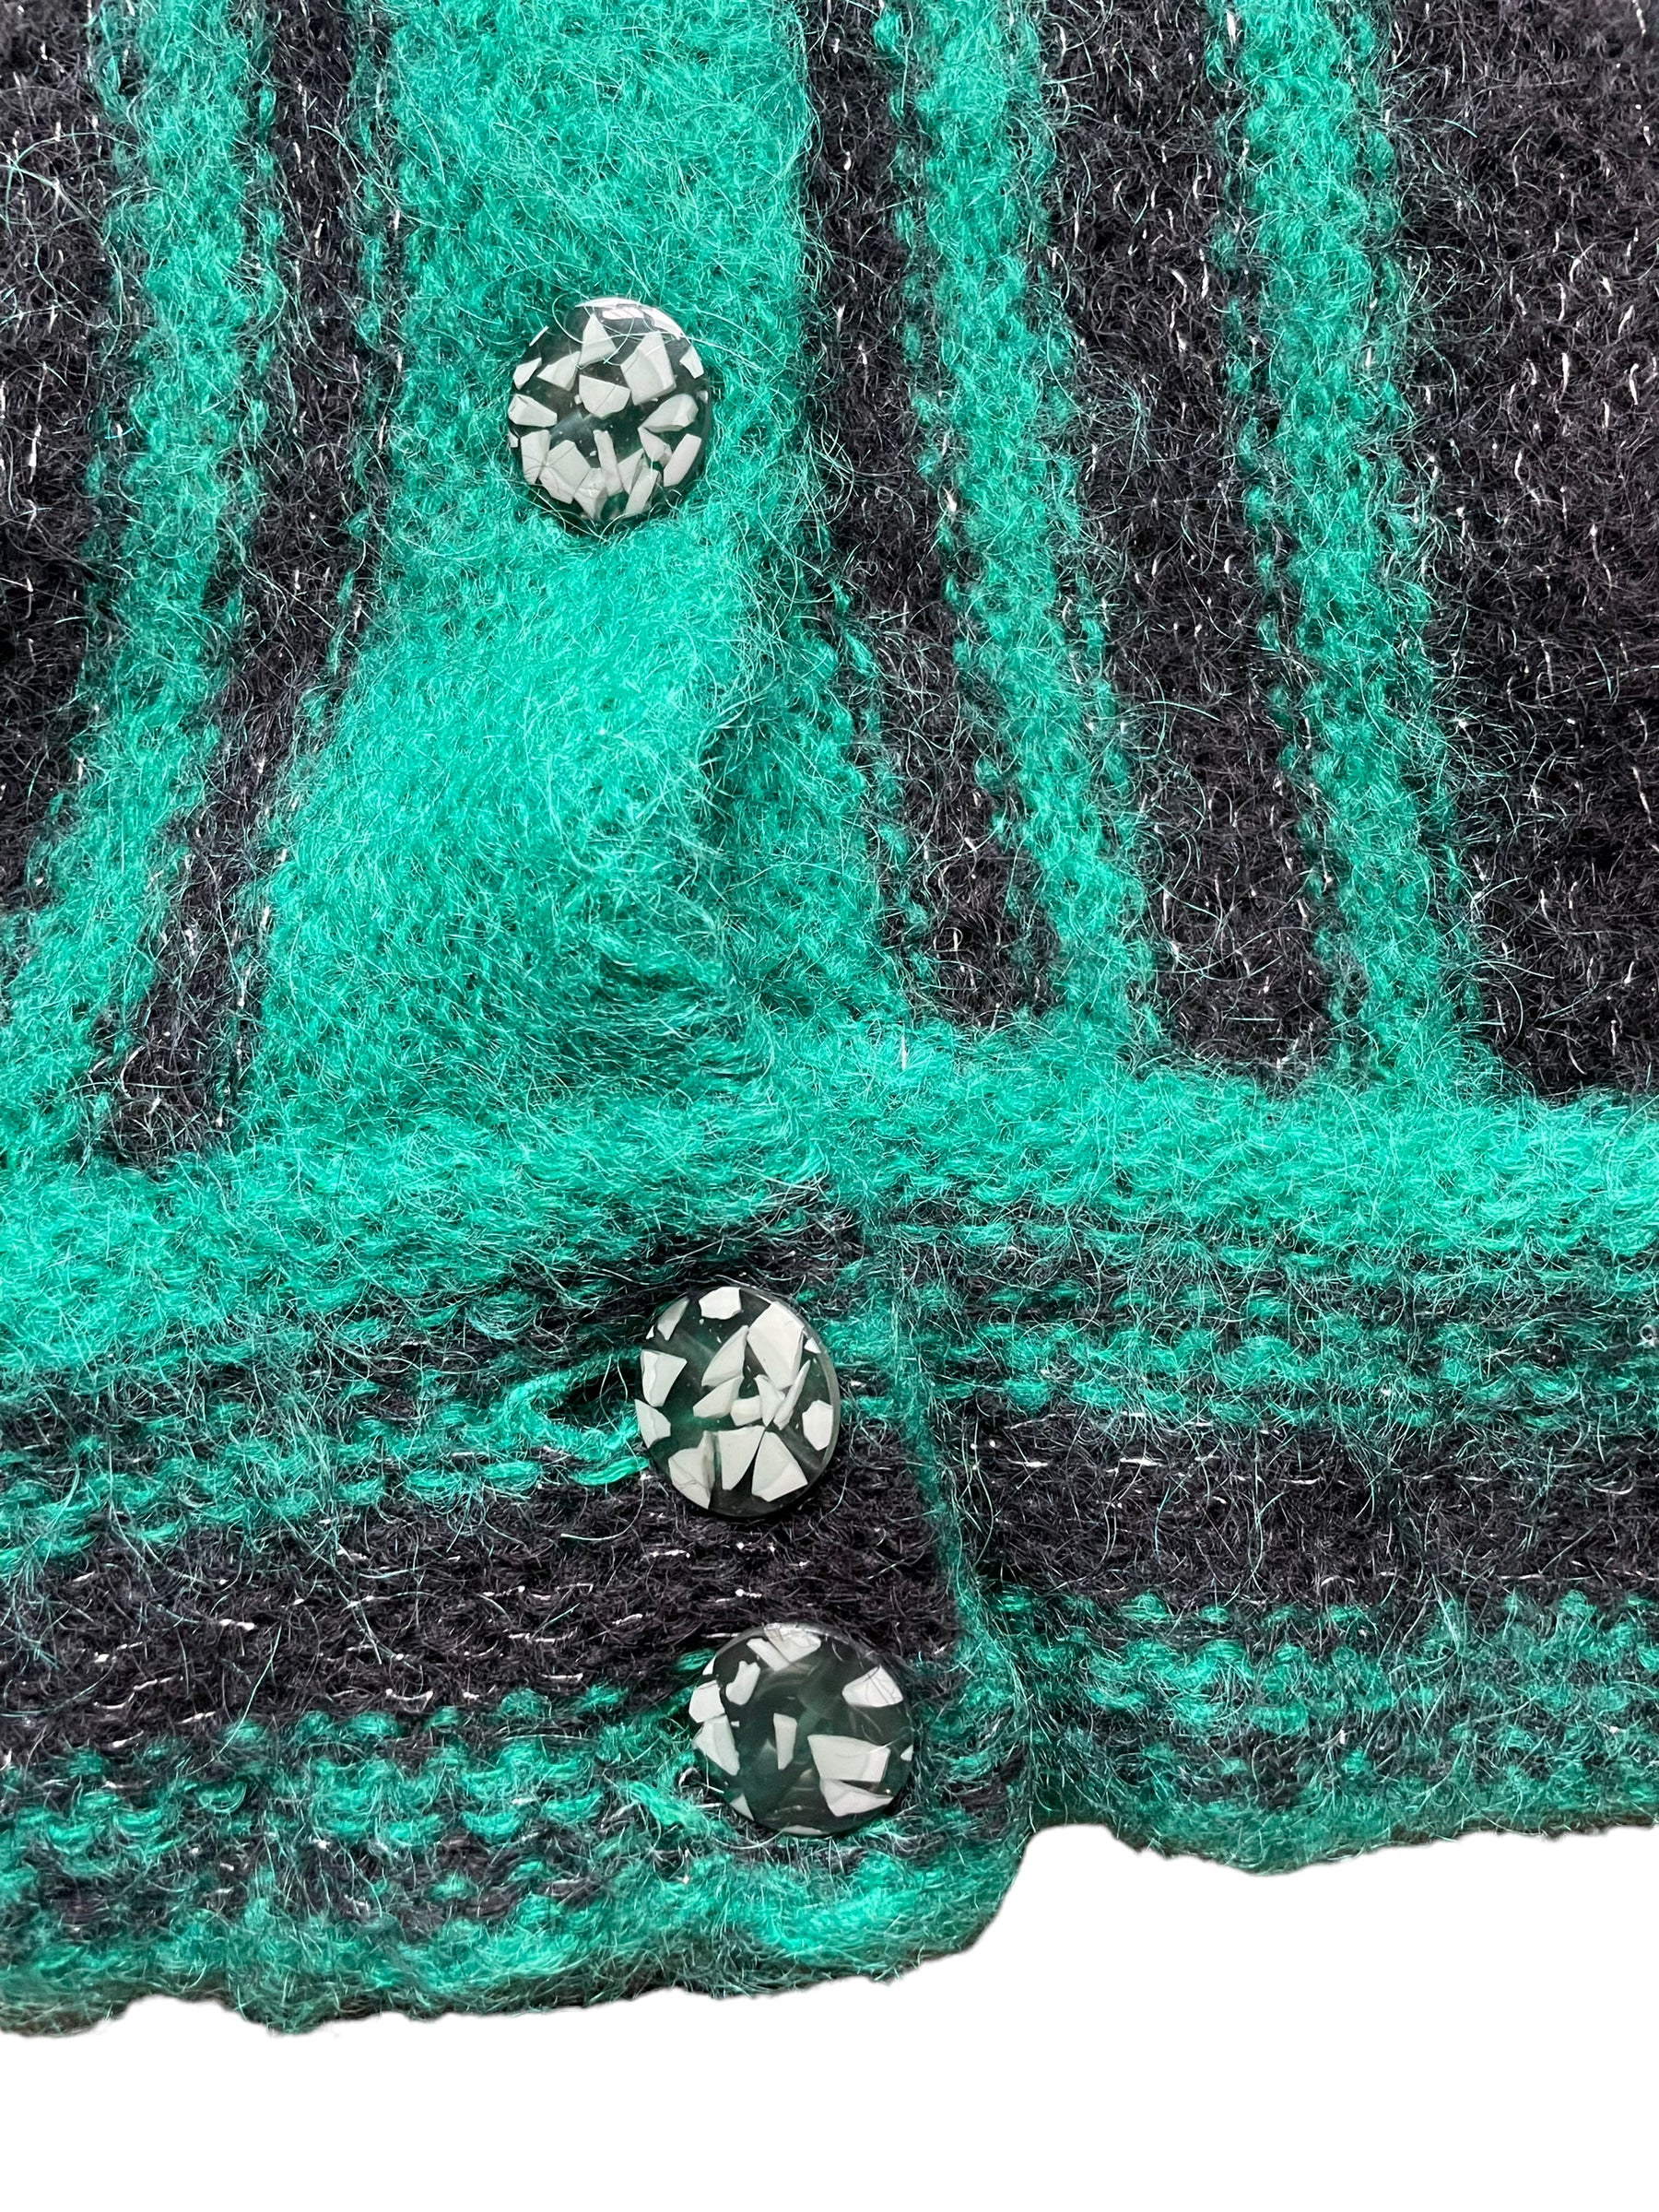 Waist button detail of Vintage 80s Green and Black Sparkly Cardigan SZ L | Seattle True Vintage | Barn Owl Vintage Womens Clothing